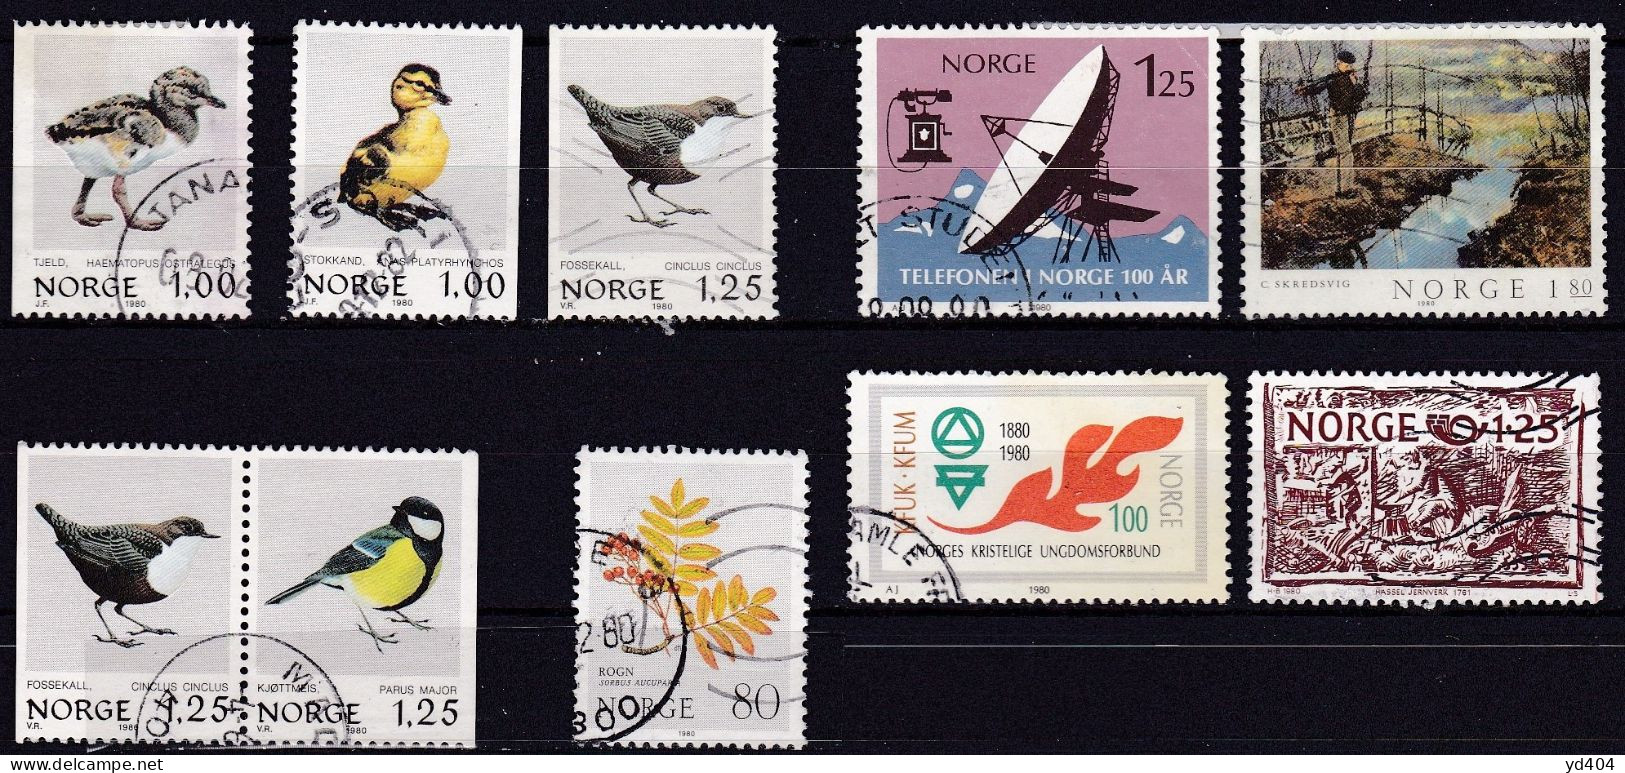 NO095 – NORVEGE - NORWAY – 1980 USED LOT – Y&T # 765-779 – CV 3,50 € - Used Stamps